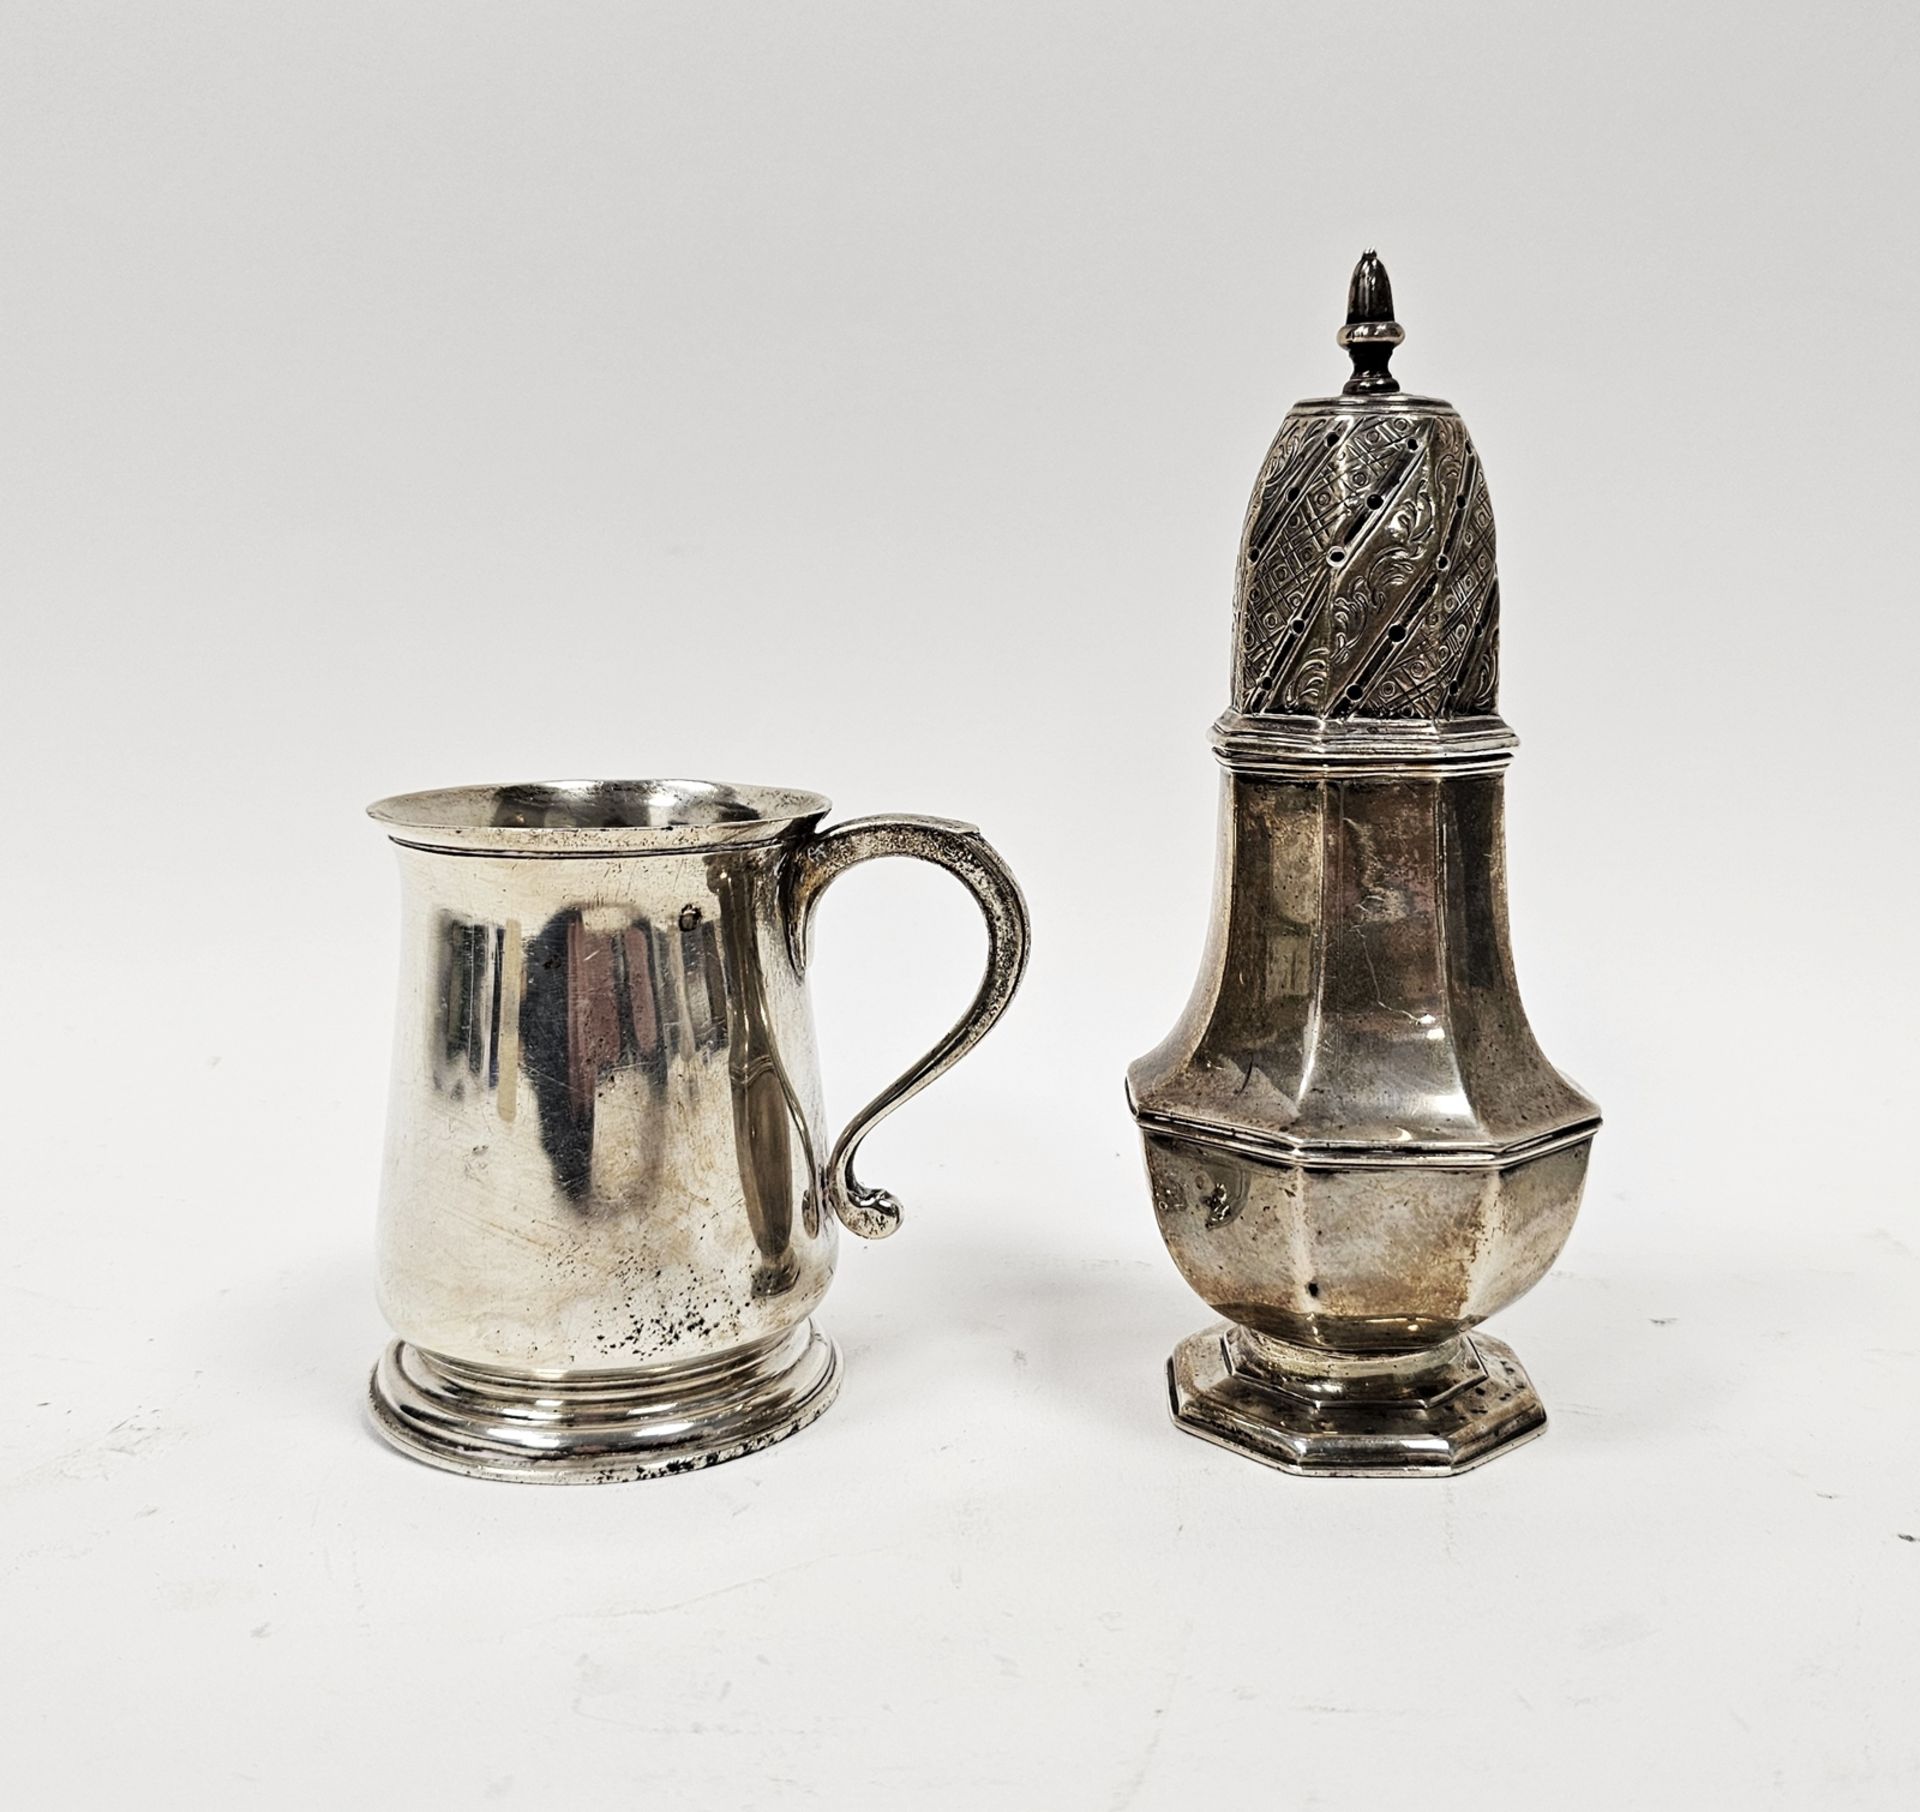 Silver sugar caster by Stokes & Ireland Limited, Birmingham 1892, of panel baluster form with